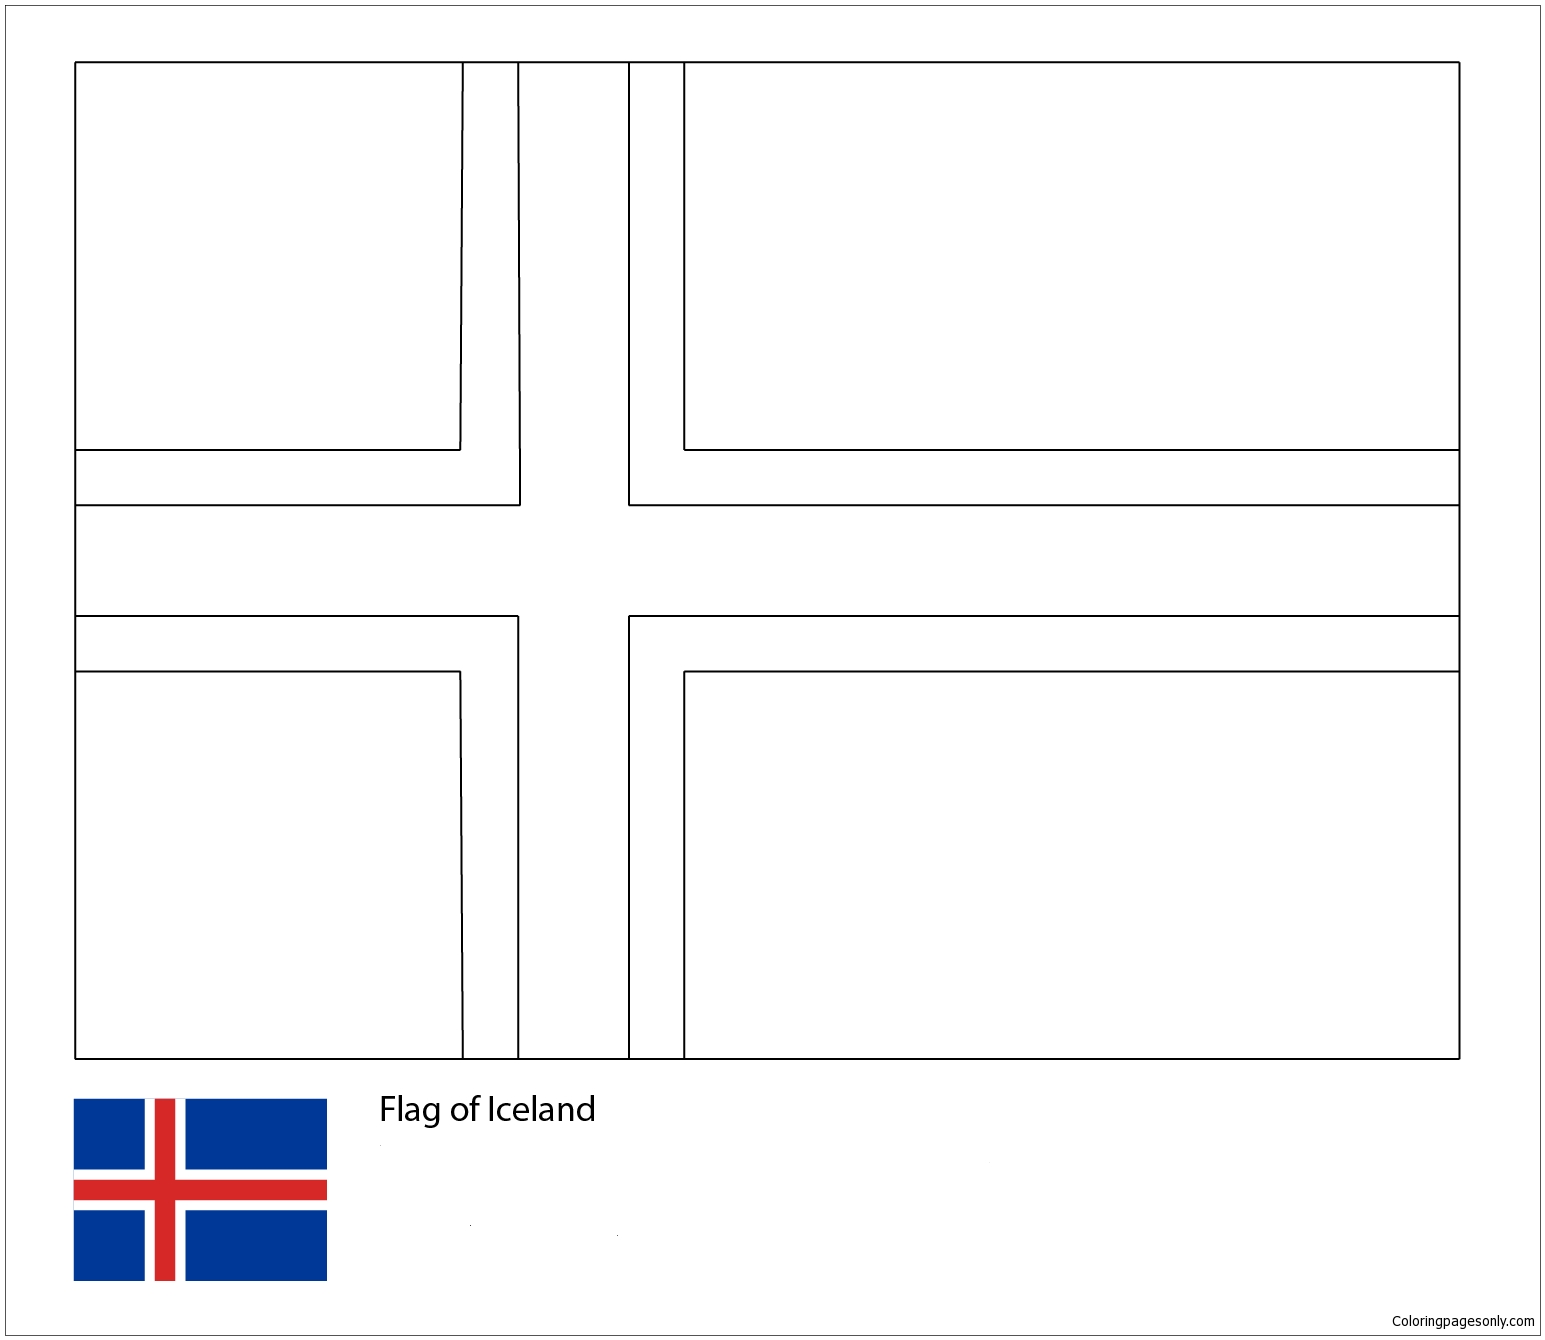 Download Flag of Iceland-World Cup 2018 Coloring Page - Free Coloring Pages Online